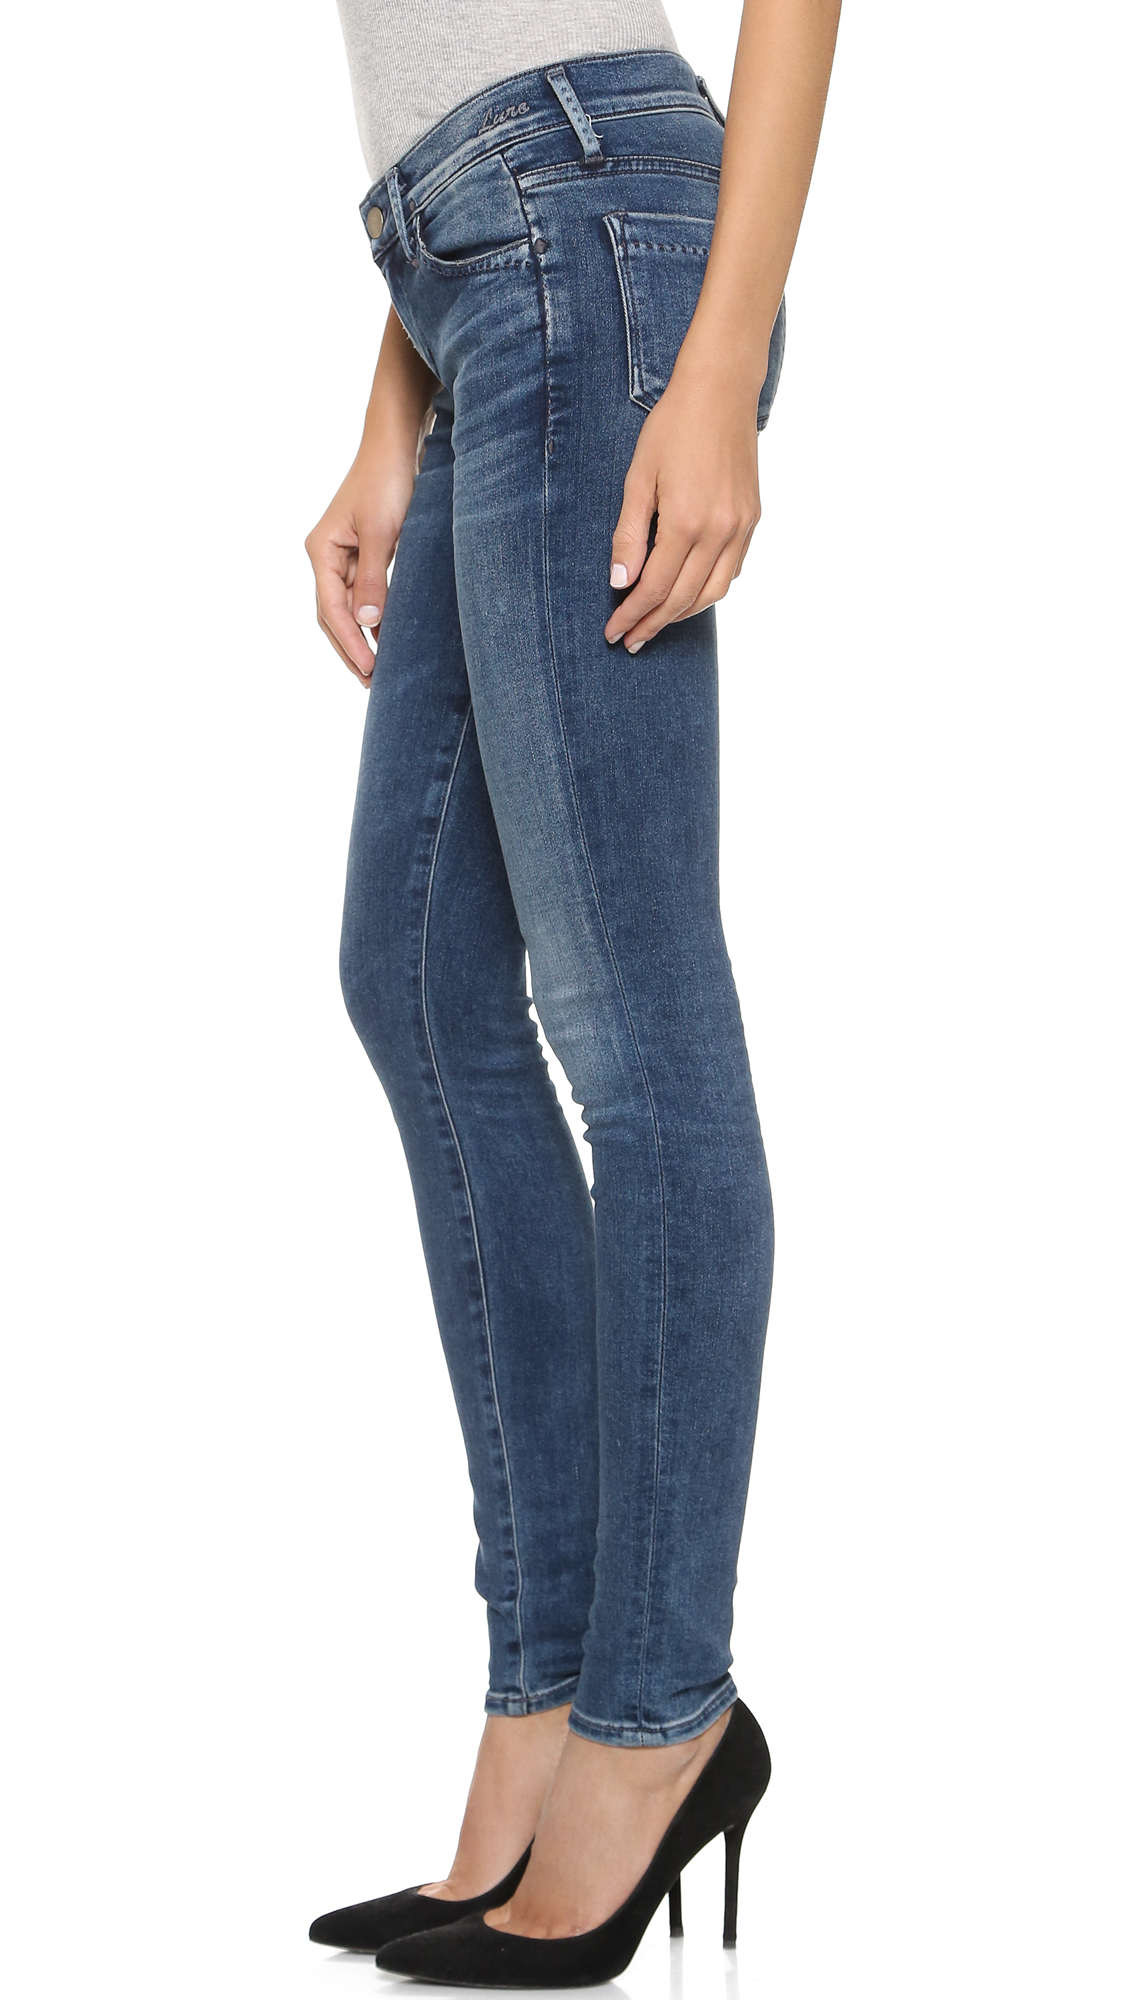 Lyst - Goldsign Lure Skinny Jeans in Blue